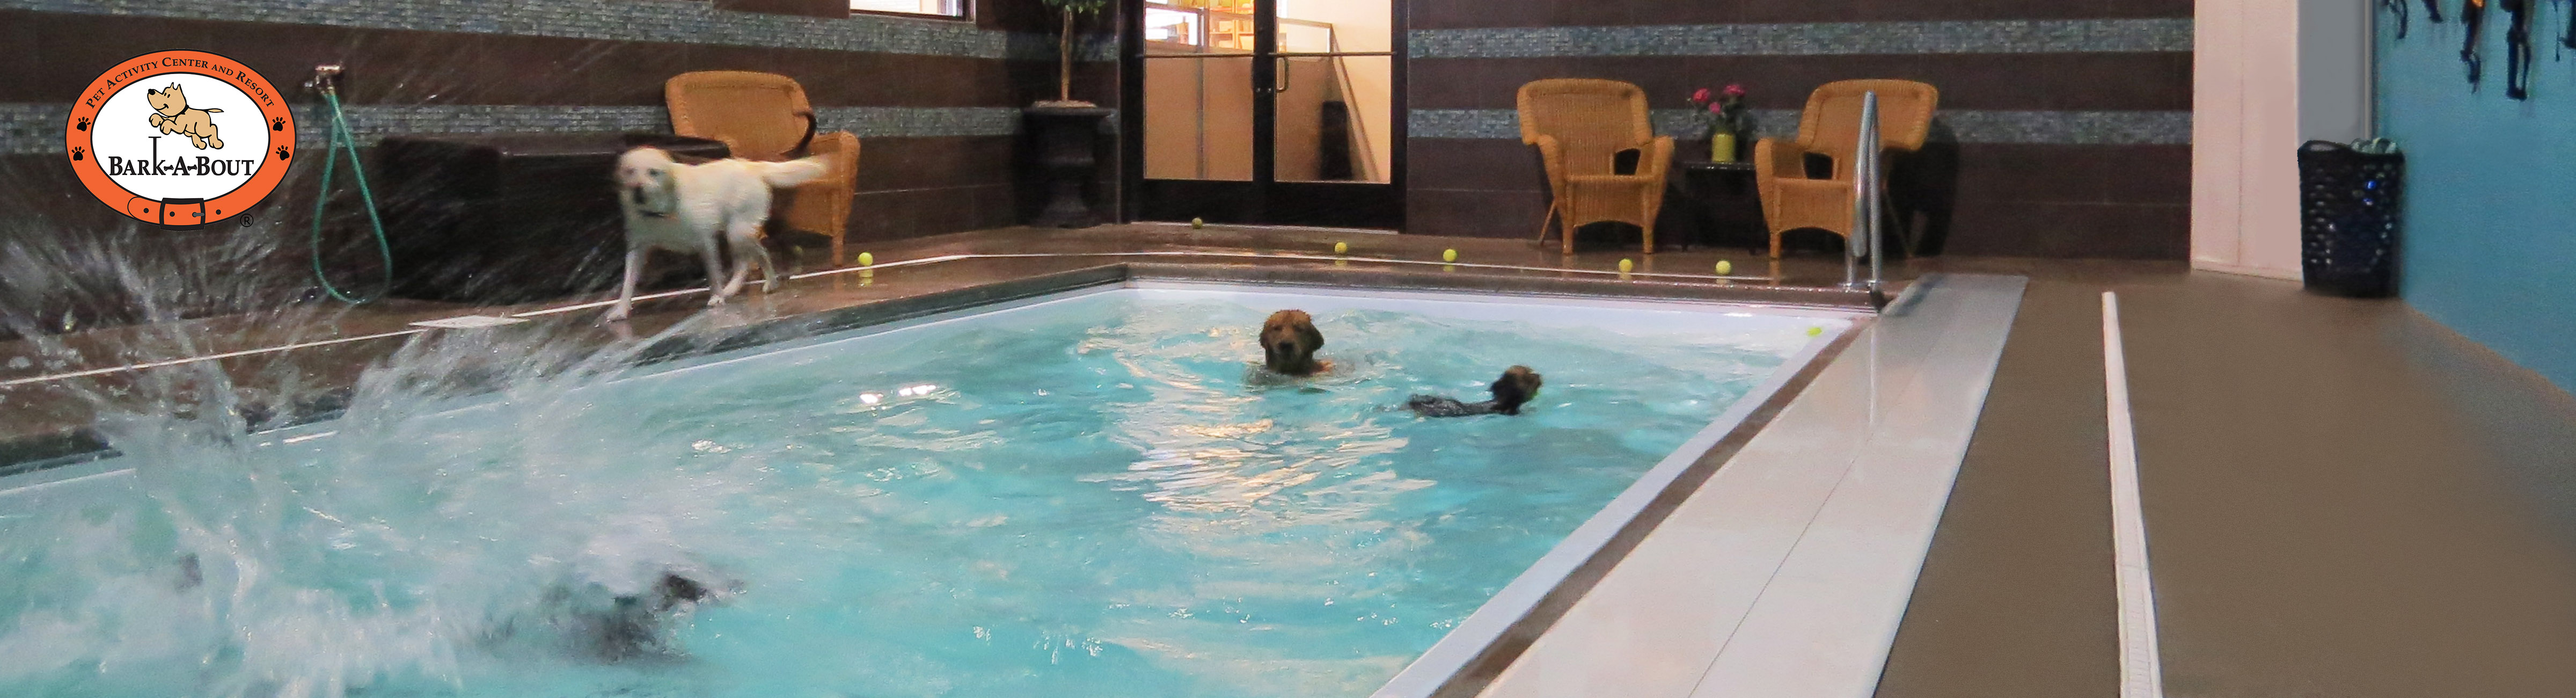 Indoor Dog Swimming, Indoor Pool for Dogs, Indoor Pet Training Pool, Dog Swimming, Dog Swimming Pool, Aquatic Center For Dogs, Dog Hotel, Pet Hotel, All Inclusive Pet Resort, Dog Daycare, Dog Hotel, Boarding